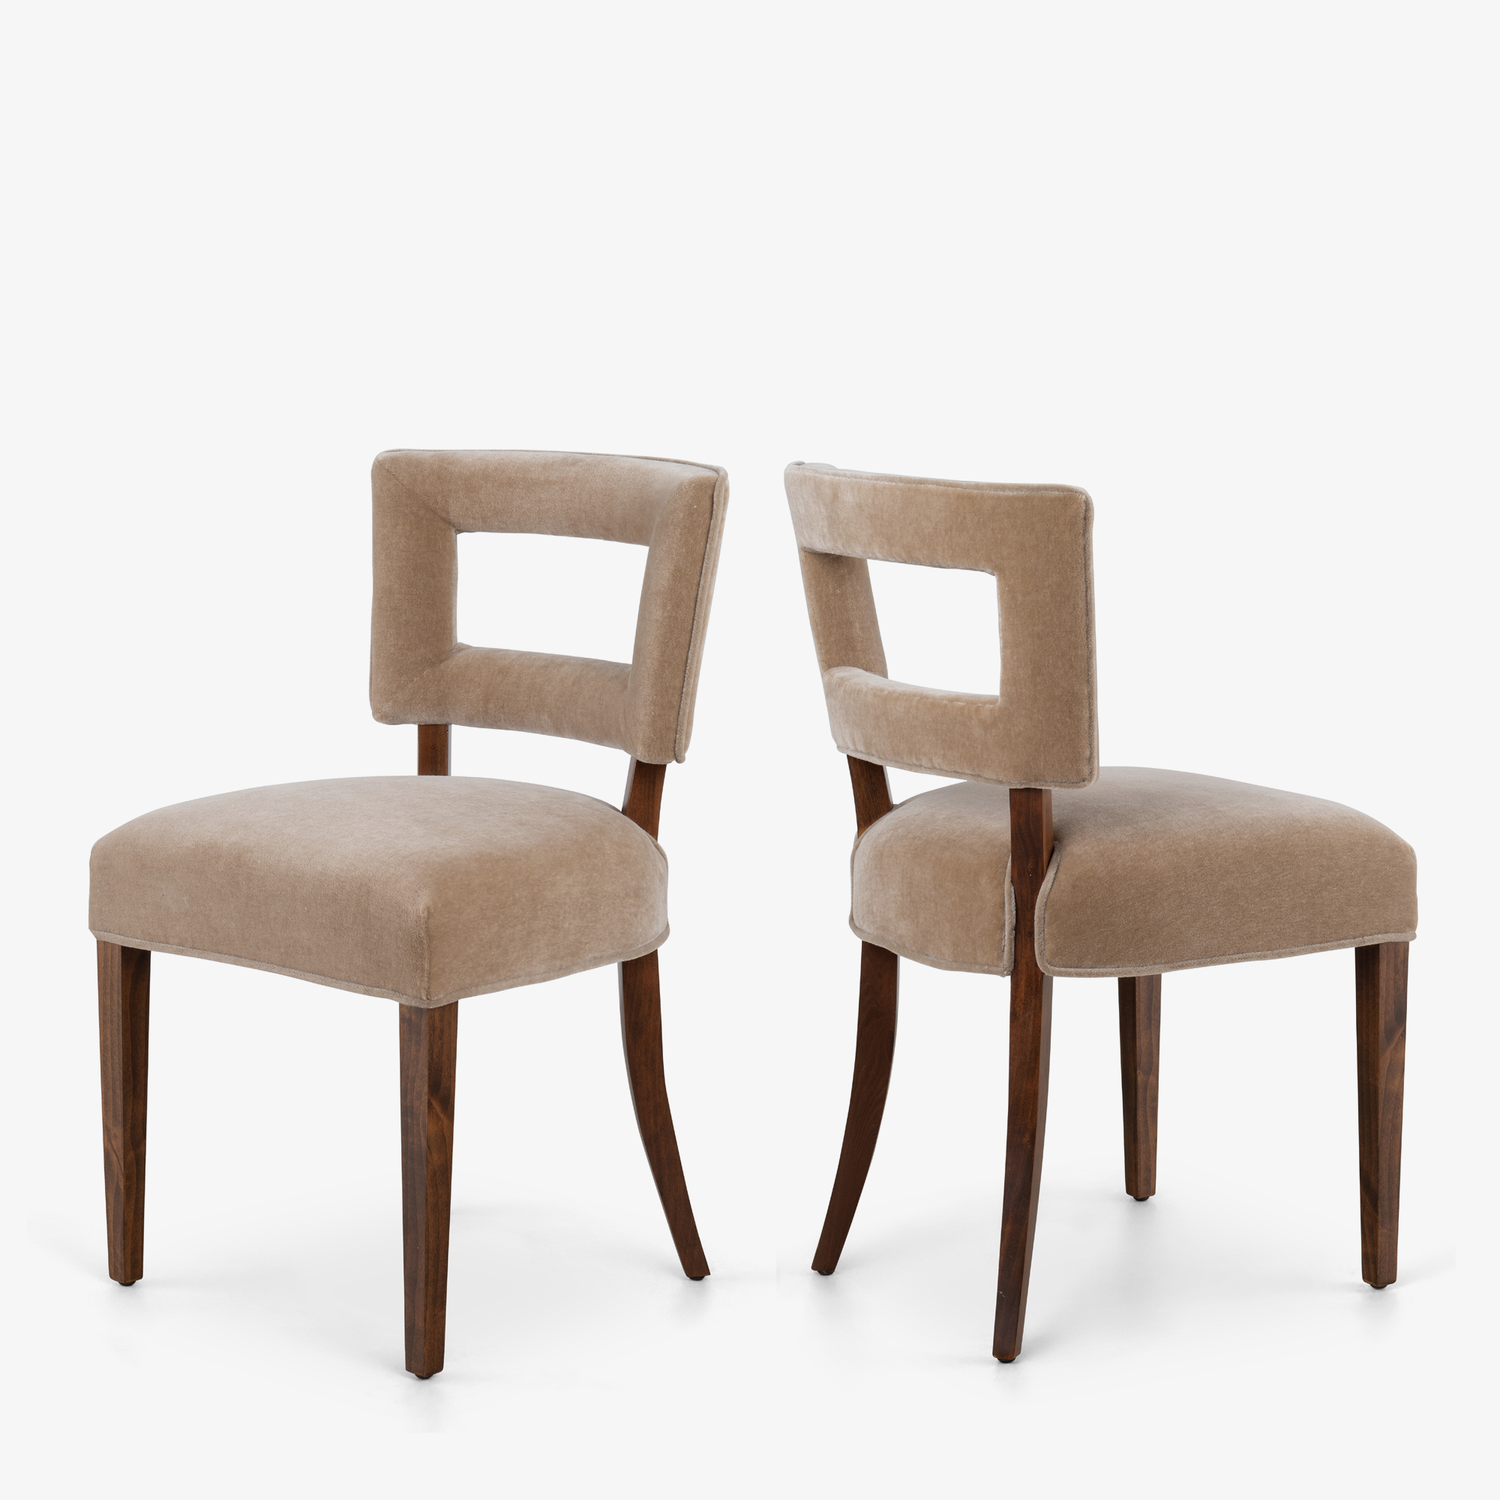 Set Refinery 6 Herman Beige Mohair, Rohde | Sand Object Paldao for of Chairs in Dining Miller Gilbert